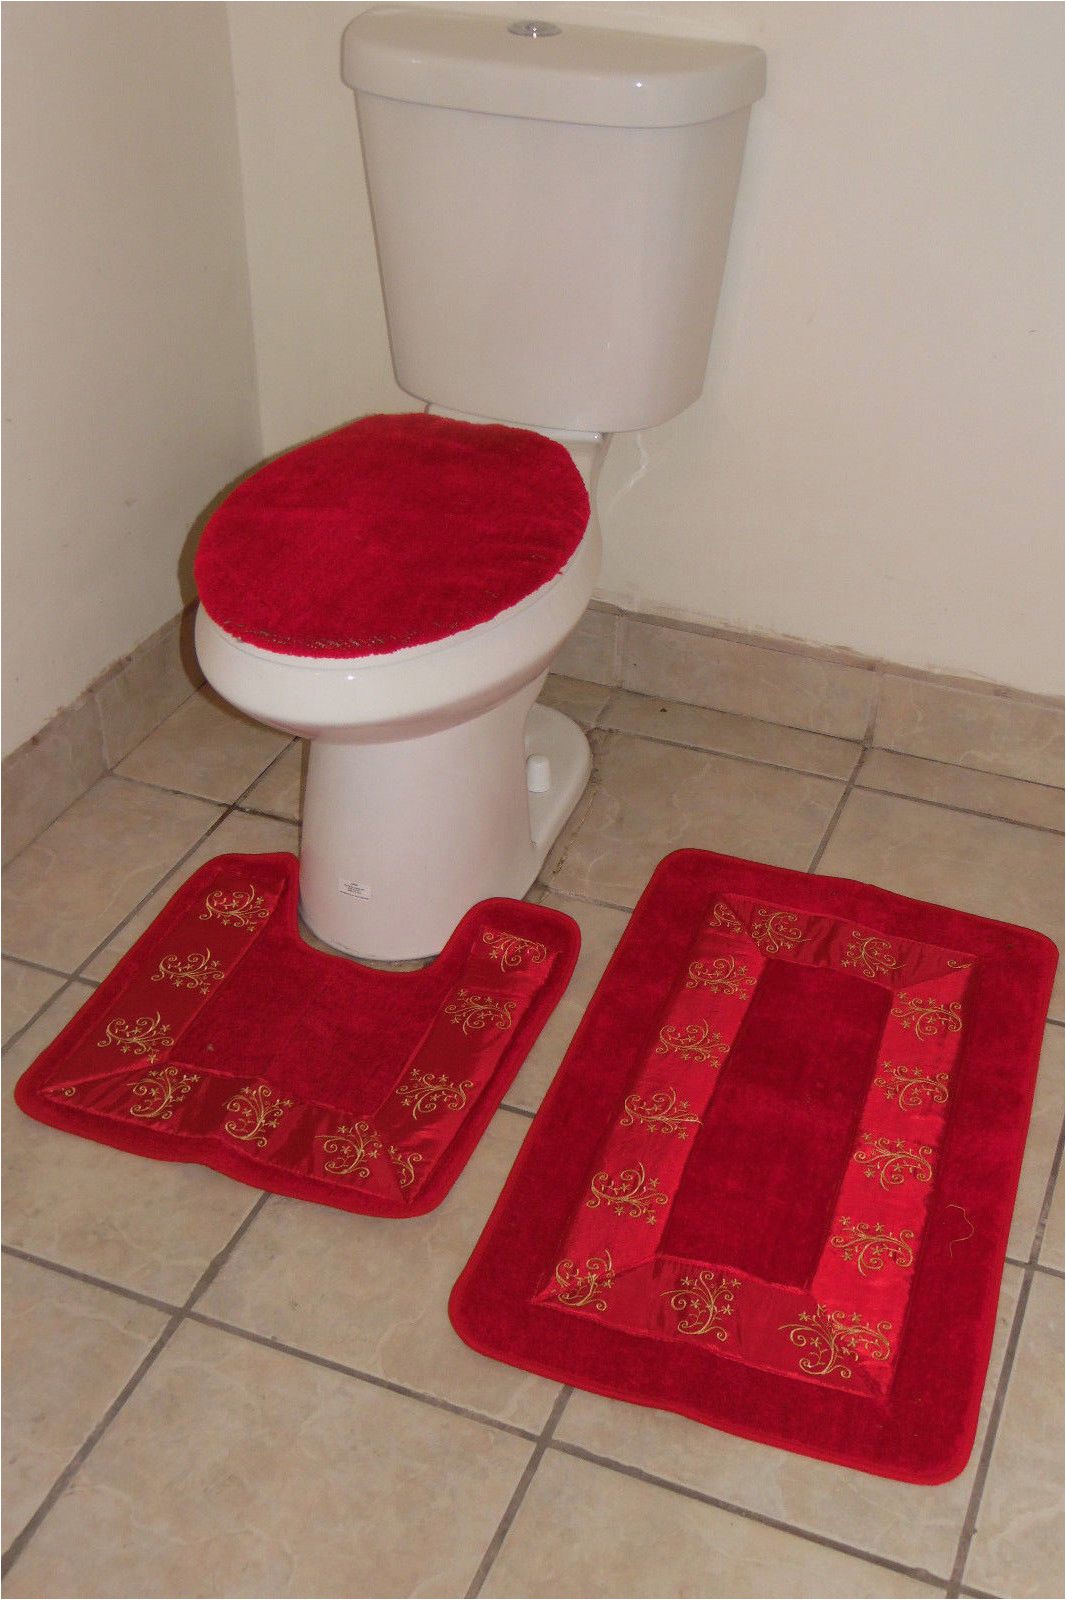 Toilet Seat Cover and Rug Bathroom Set Bathmats Rugs and toilet Covers 3pc 5 Red Bathroom